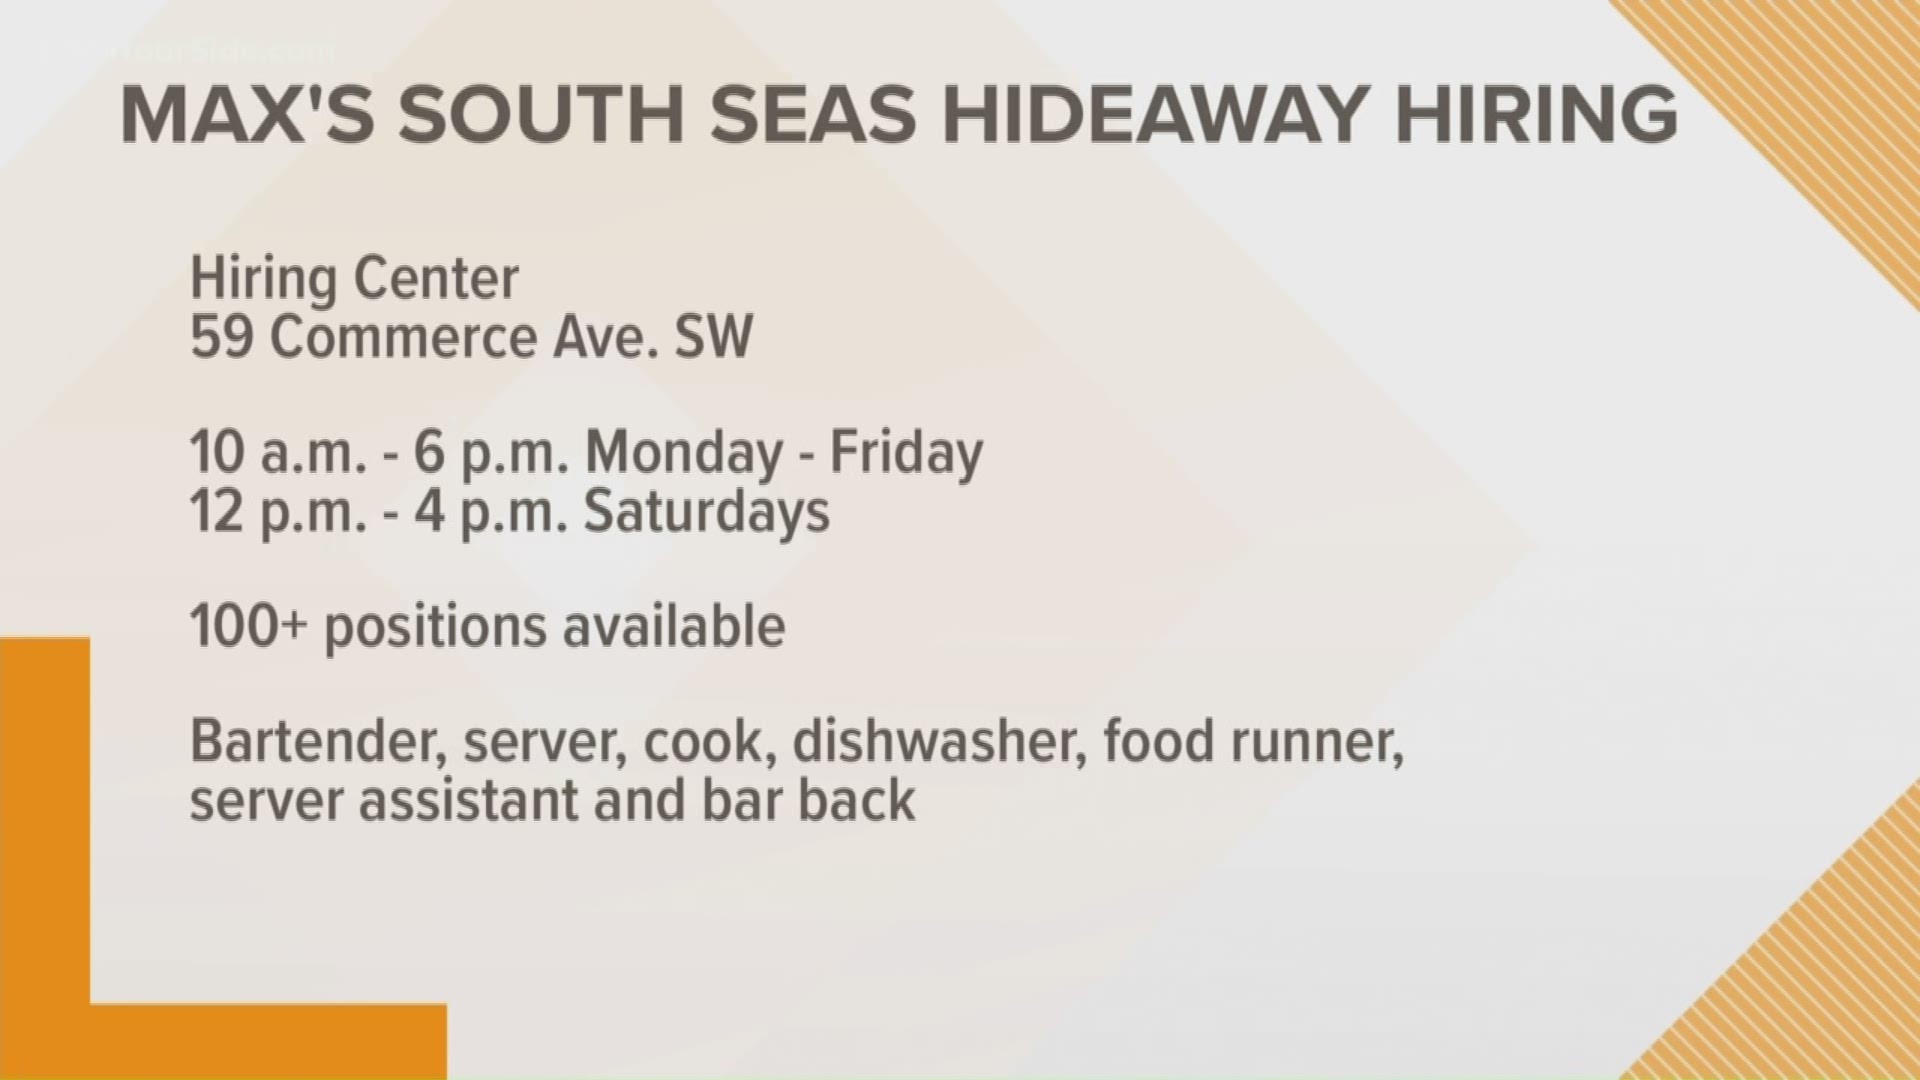 Max's South Seas Hideaway will be a three-story tiki bar, restaurant and boutique located in the historic Waldron Public House. It's hiring now and will officially open in September.